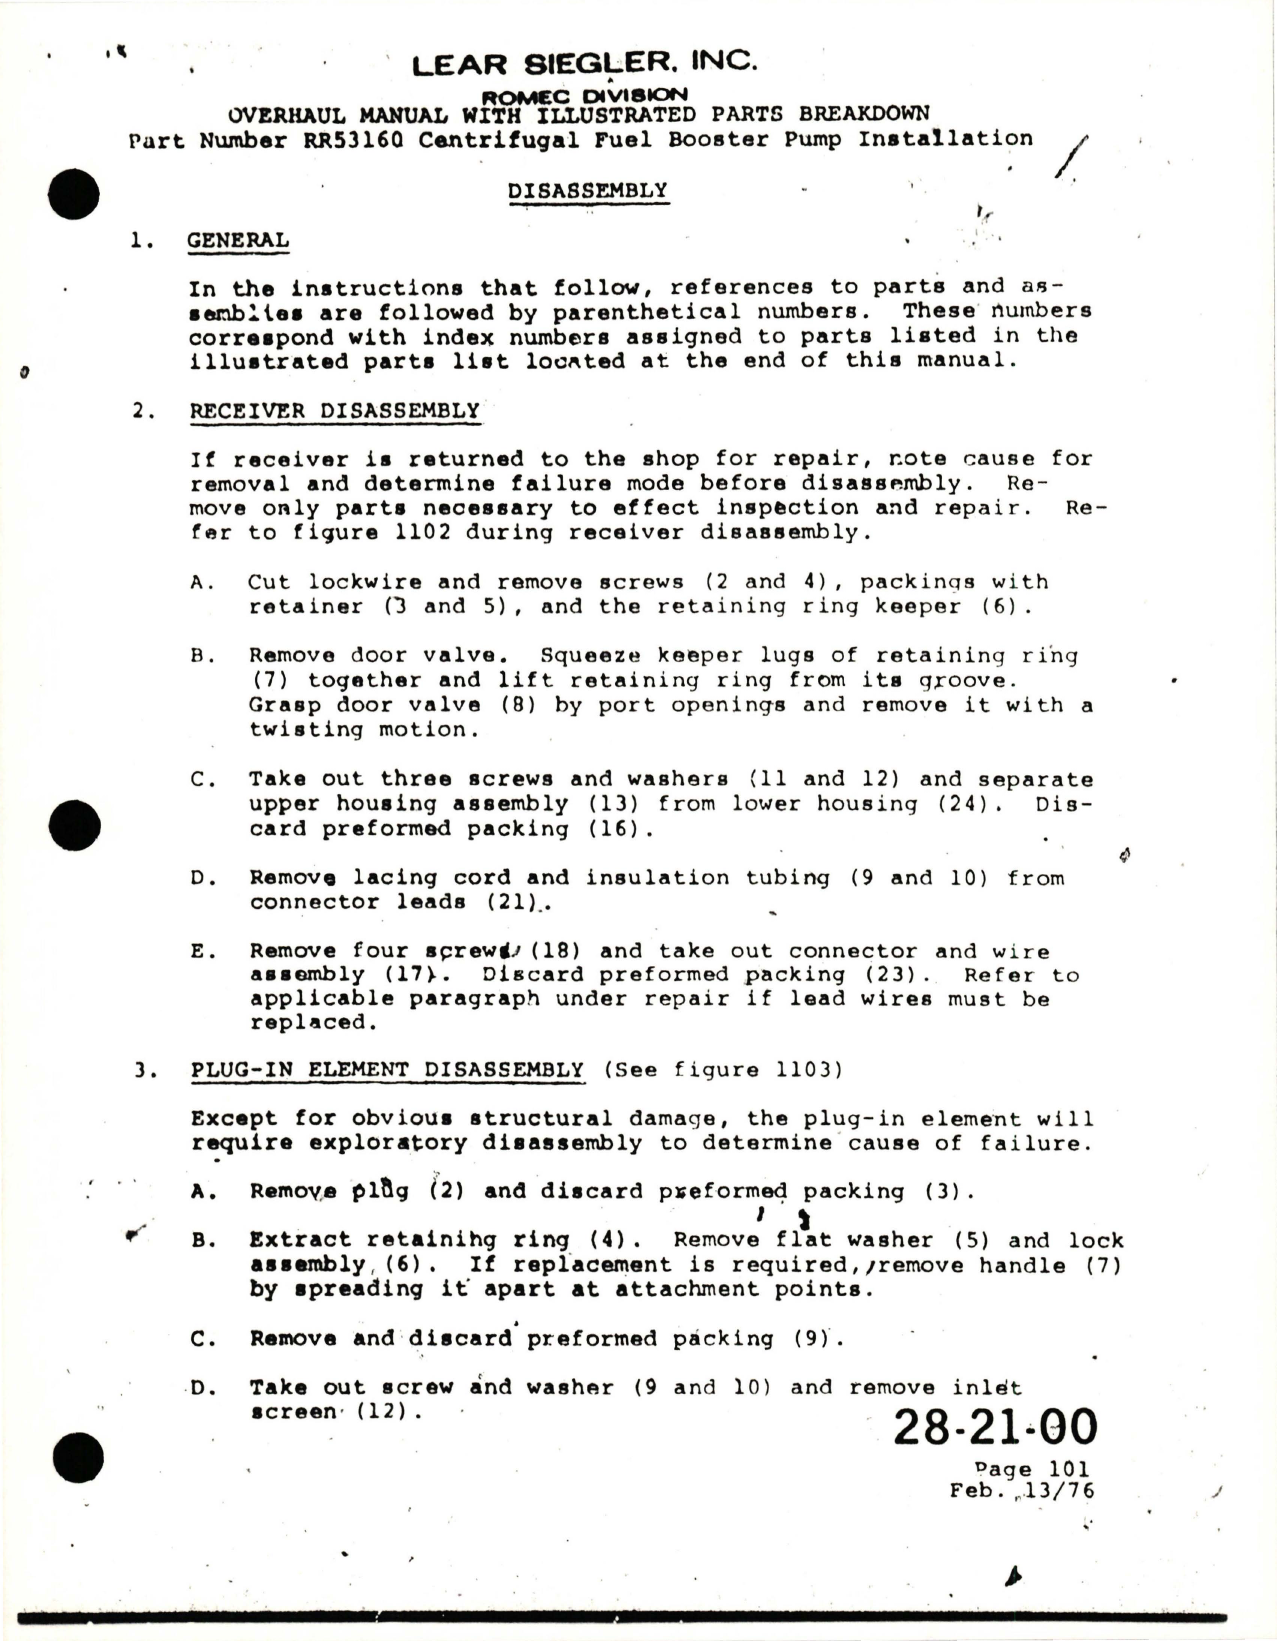 Sample page 9 from AirCorps Library document: Maintenance Manual for Centrifugal Fuel Booster Pump Installation - Series RR53160 